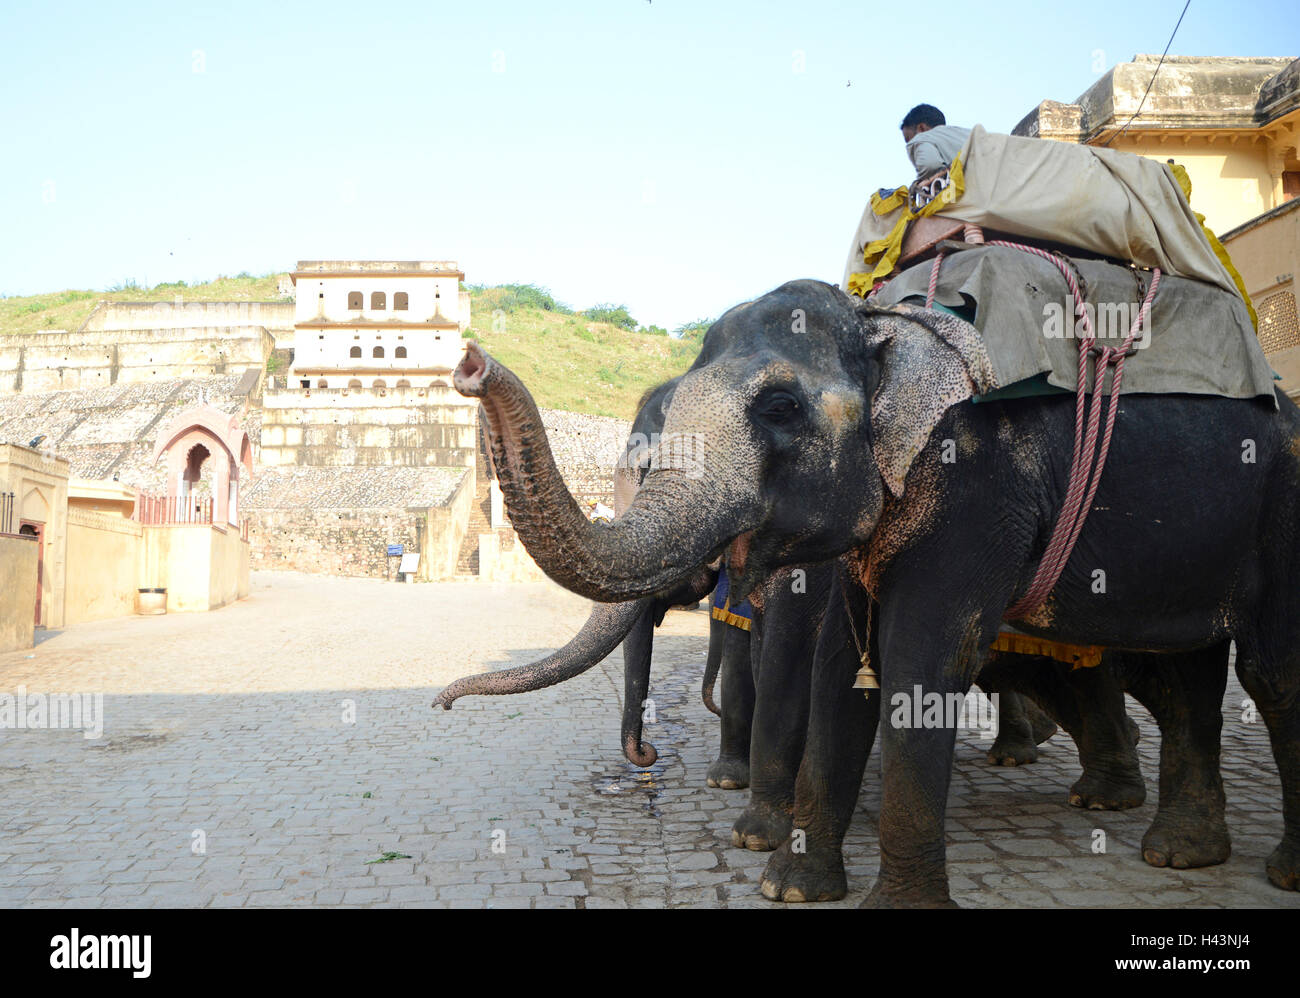 Mahout riding Elephant at Amber fort Stock Photo